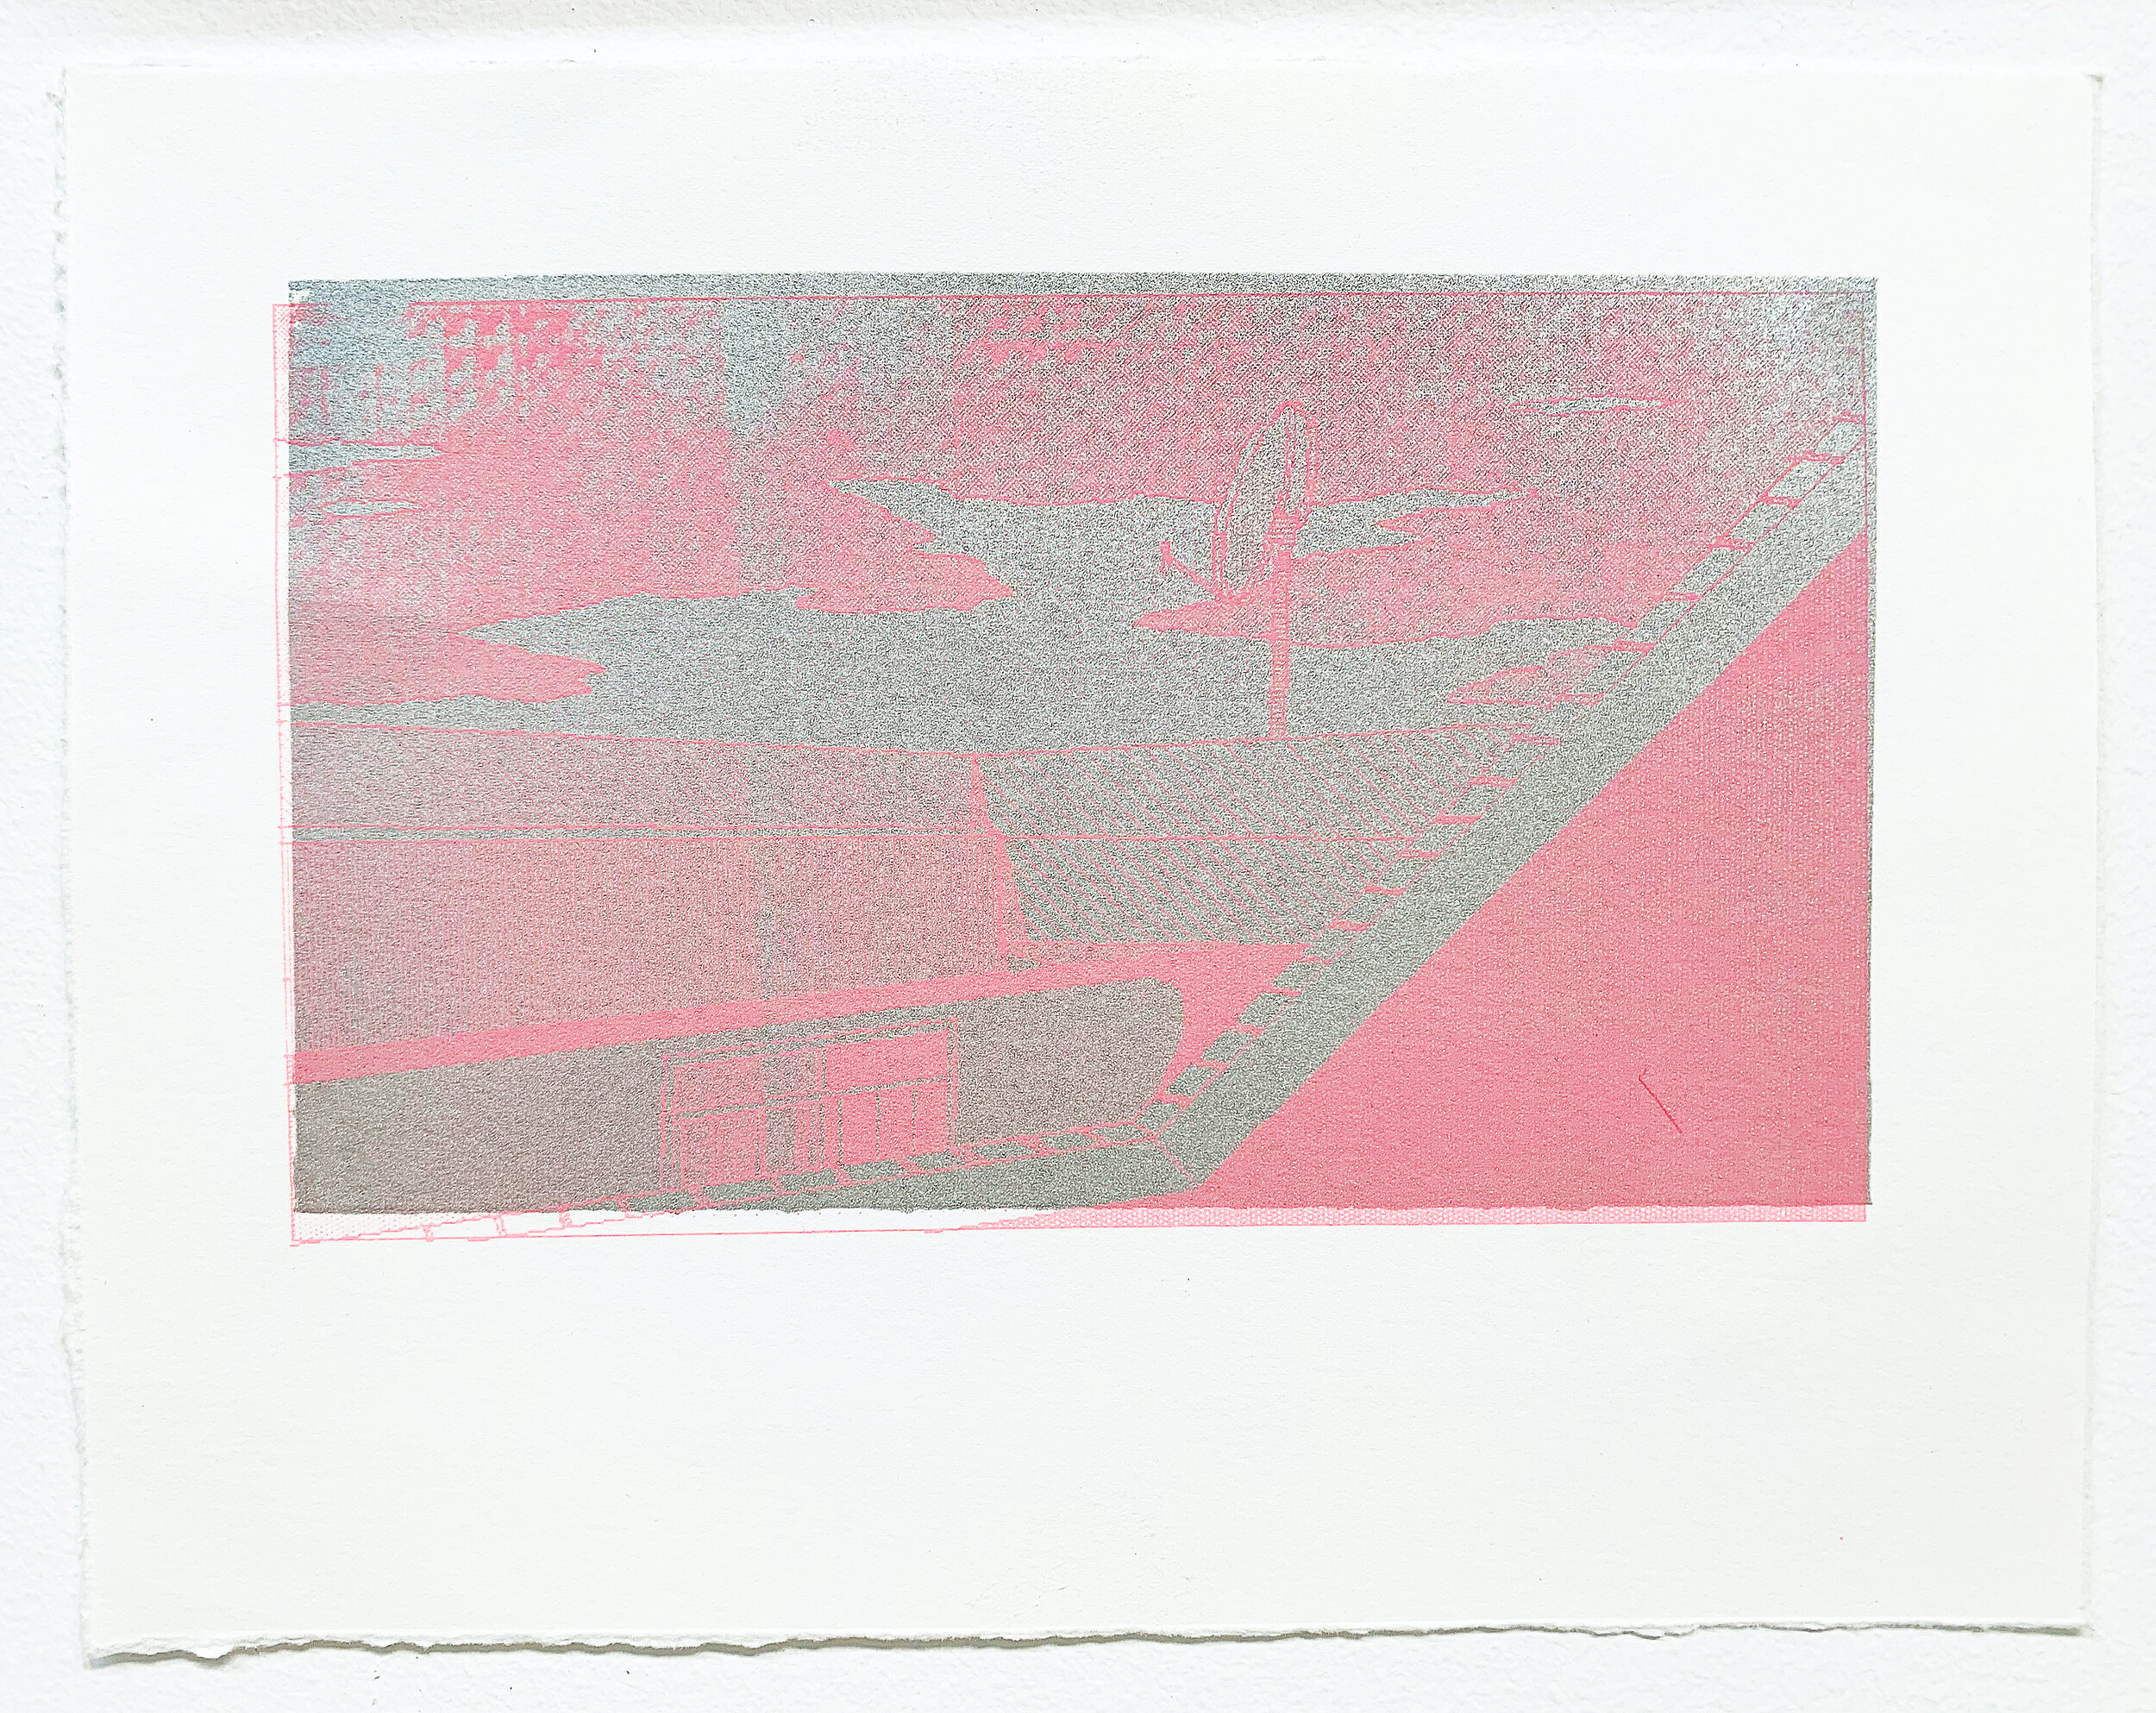  Untitled 04 screenprint on Rives BFK 11 x 8.5 inches 2019  unique print  